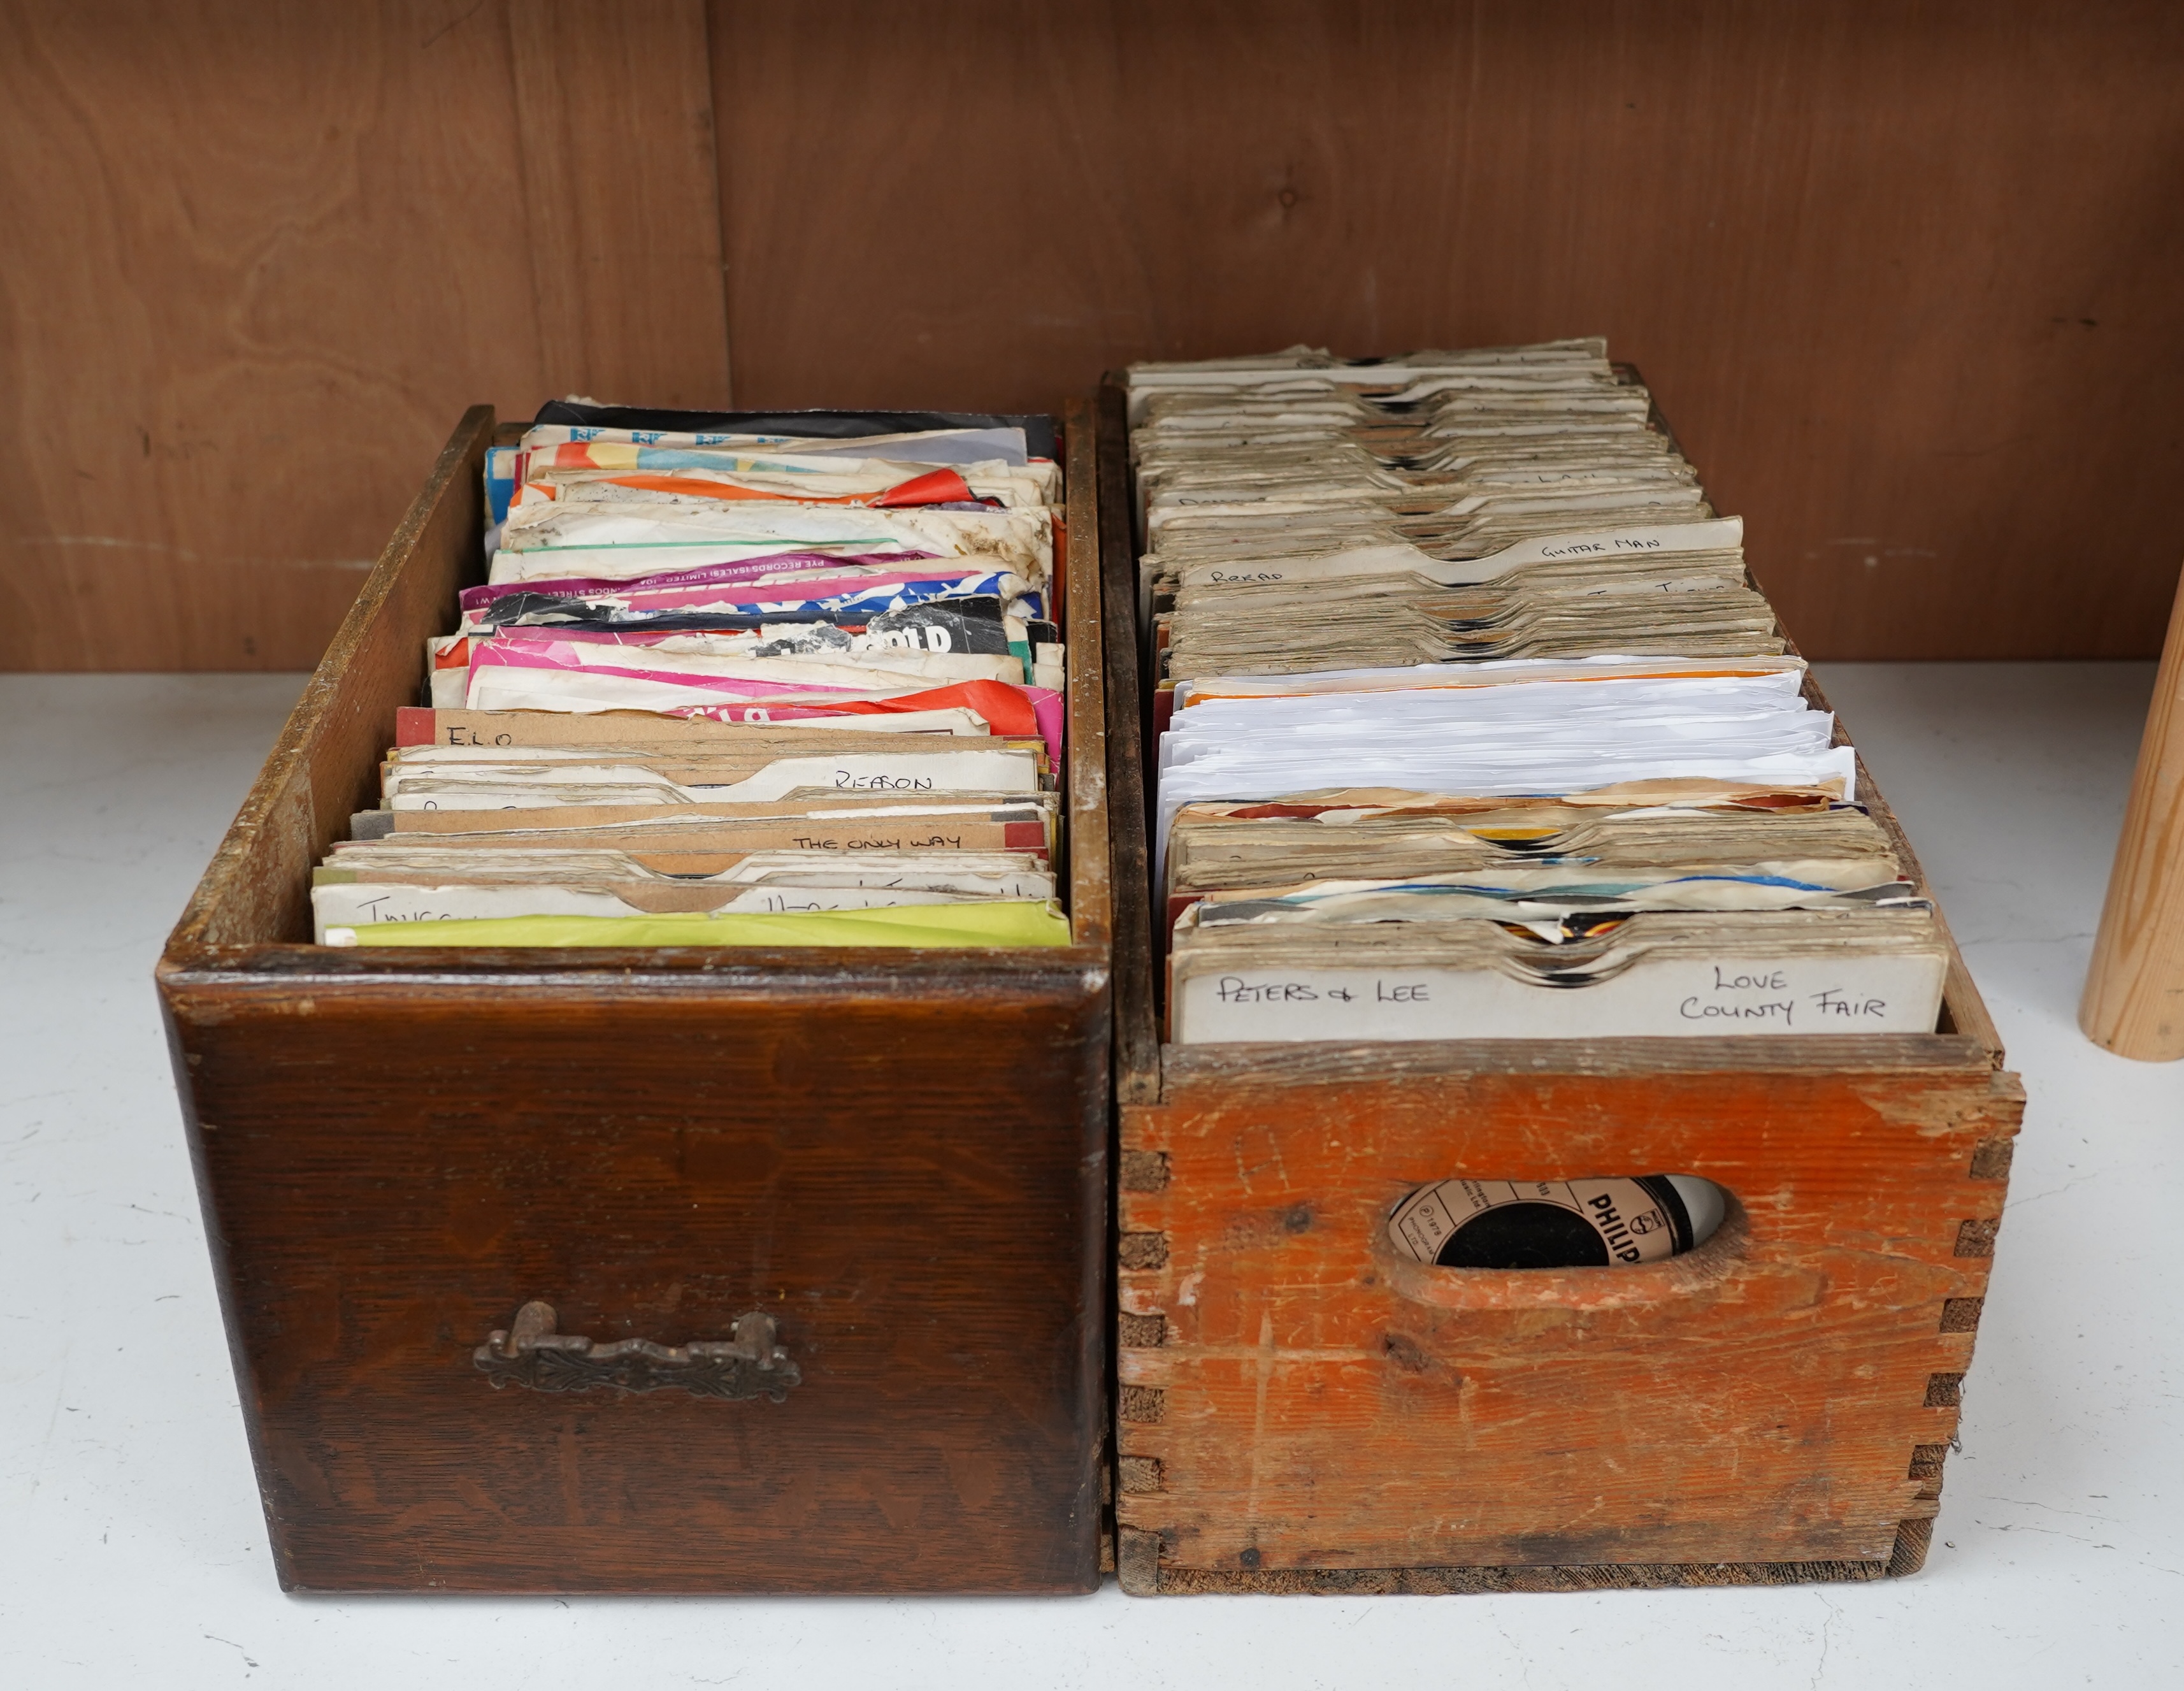 Two boxes of 7 inch singles, mainly 1960s and 1970s, including Adam and the Ants, Manfred Mann, the Stylistics, 10cc, Hot Chocolate, Bread, David Essex, Cliff Richard, ELO, the Bachelors, etc.